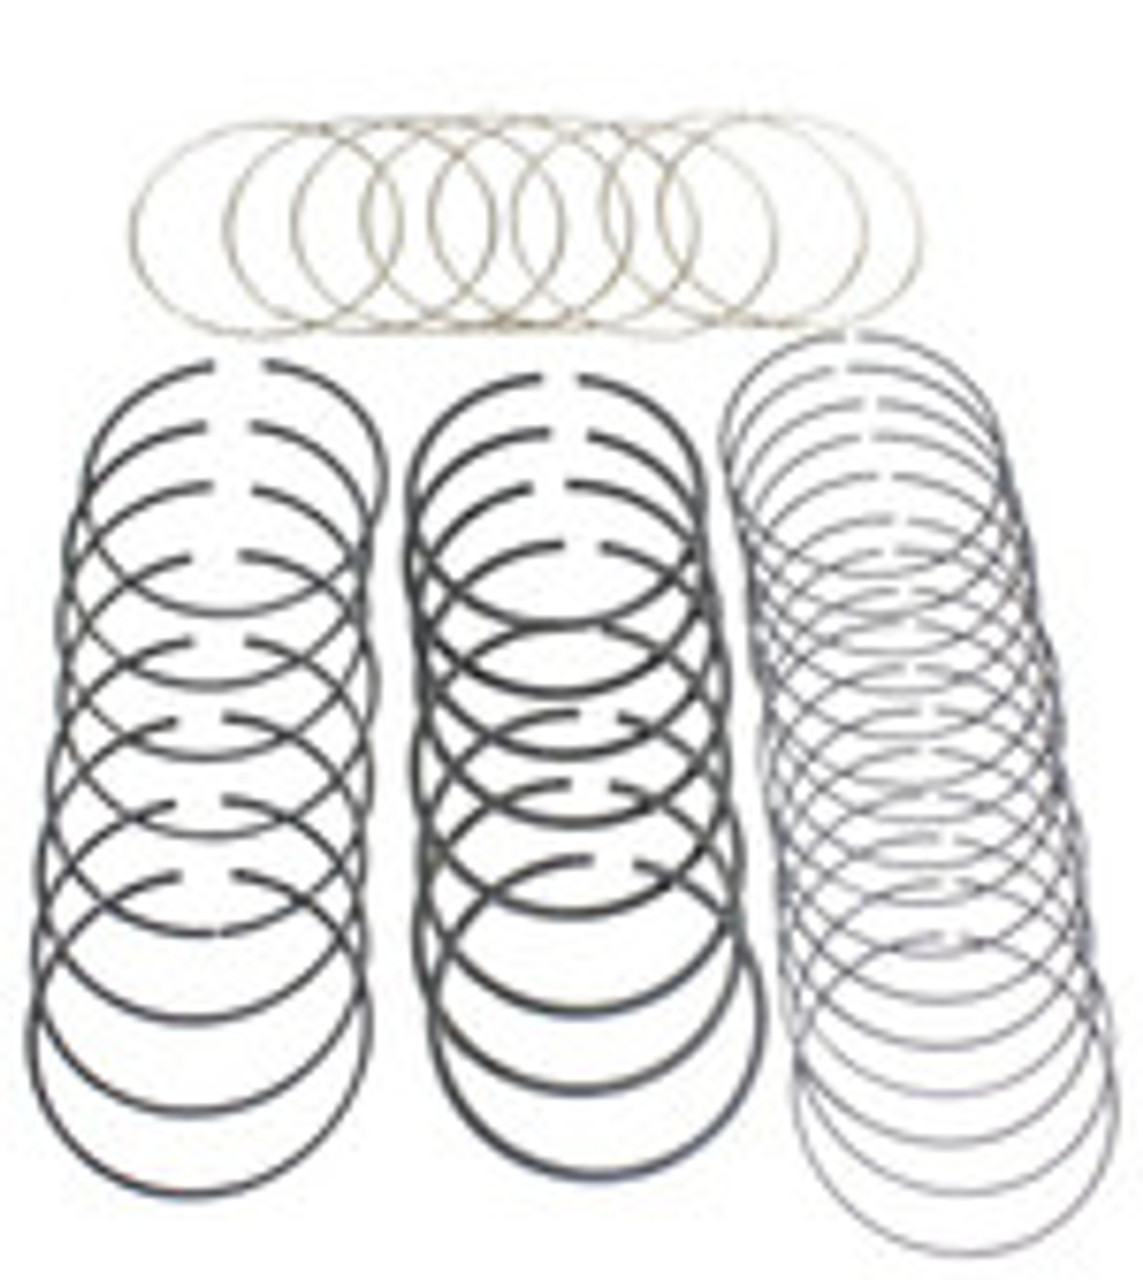 Piston Ring Set - 1986 Ford Mustang 5.0L Engine Parts # PR1141ZE140